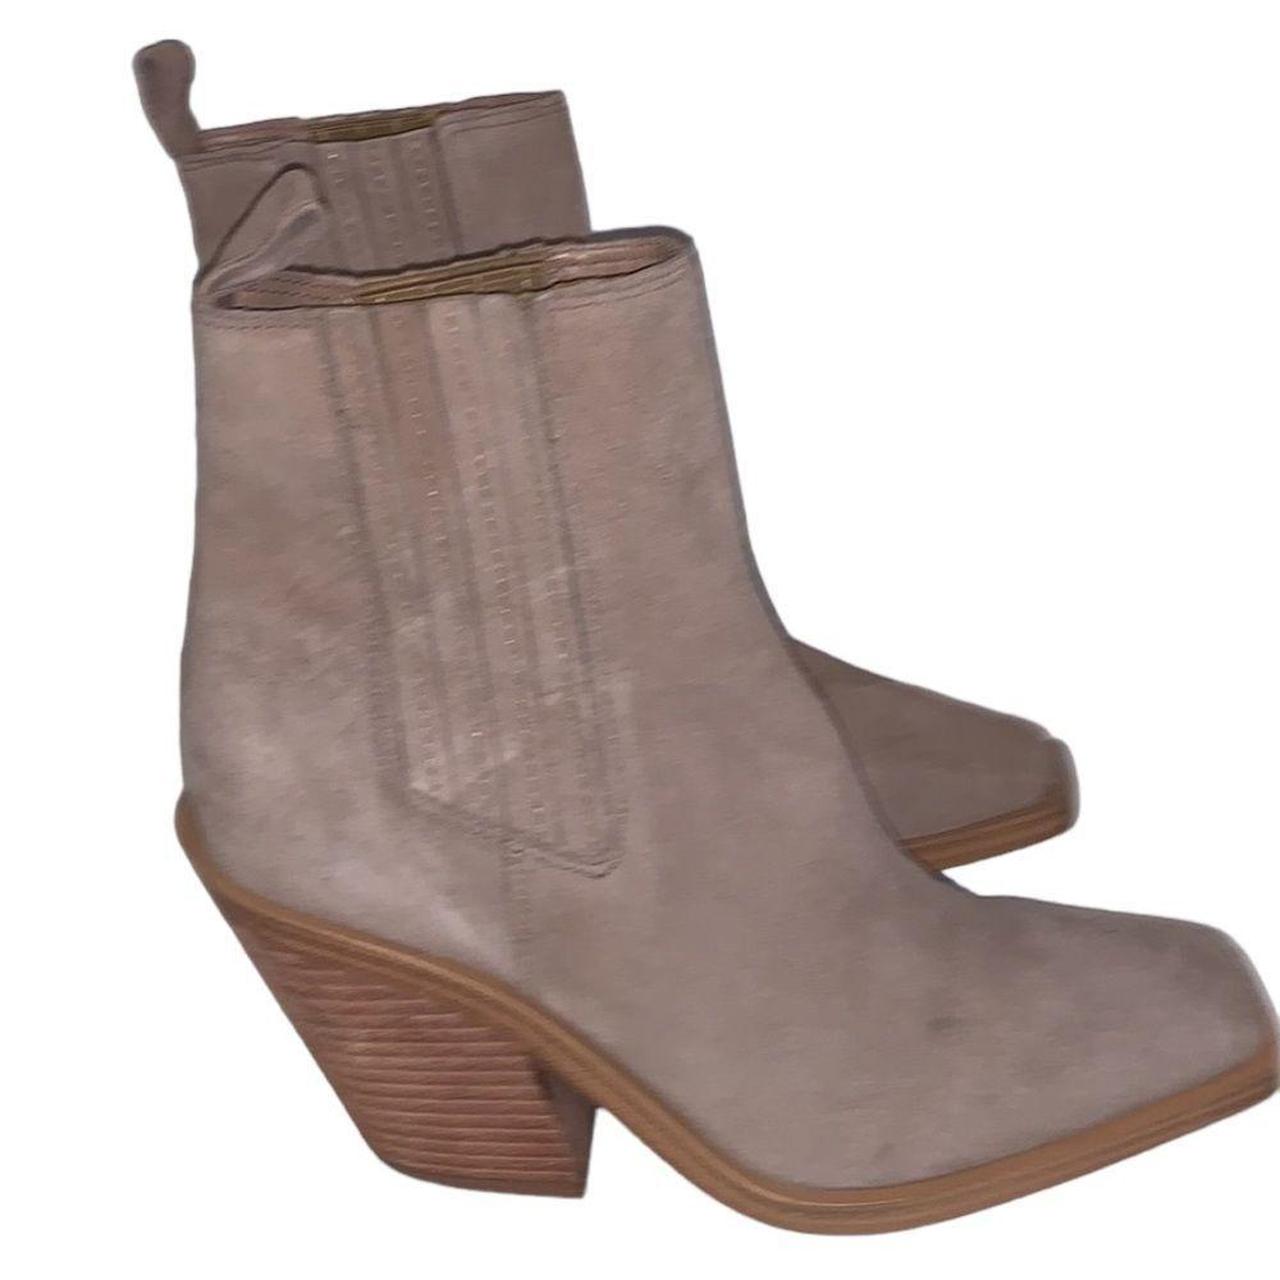 Vince Camuto Women's Boots (3)